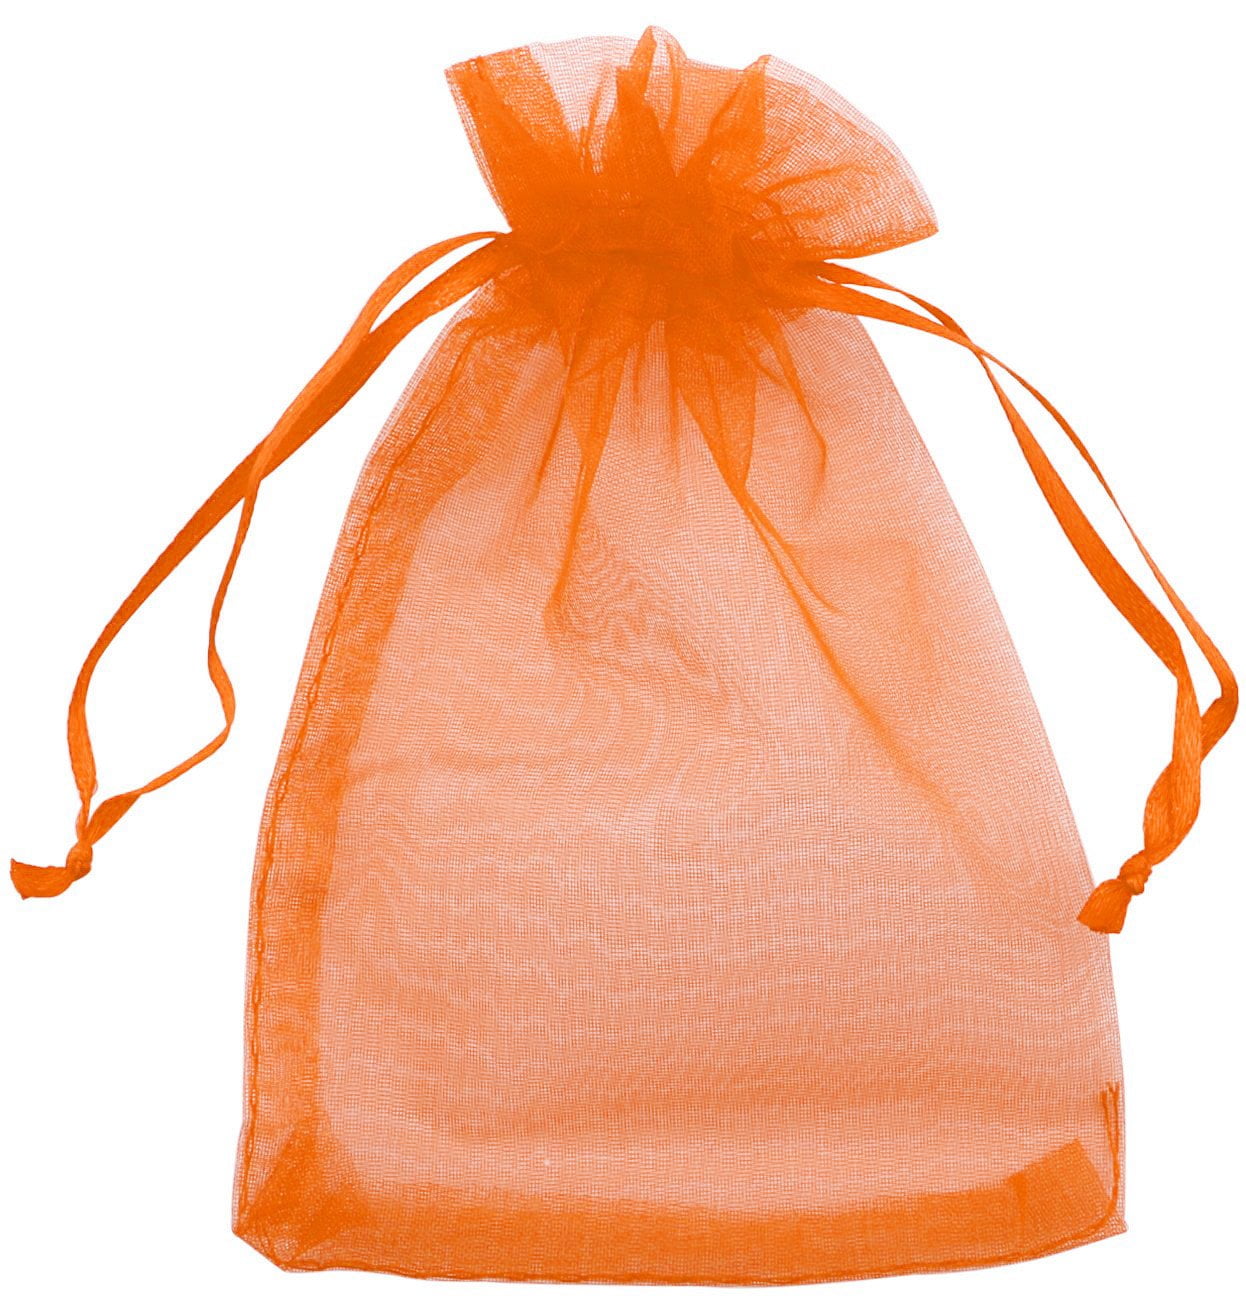 60 organza 9" x 6.8" wedding favor party gift bag pouch candy jewelry bags 30 